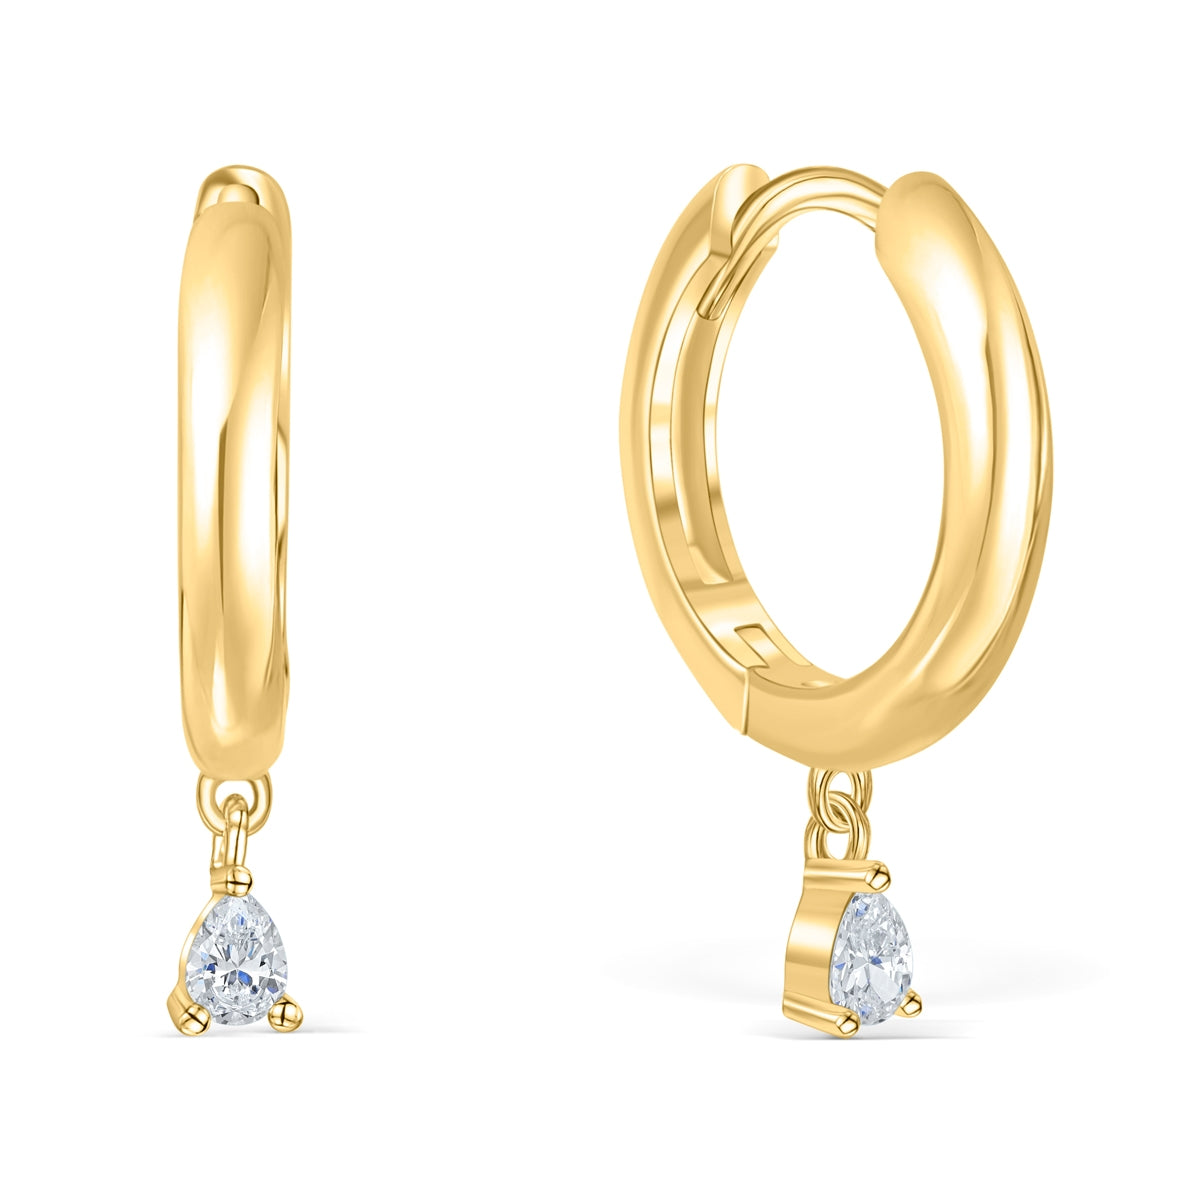 earring cz simple gold jewelry lacey 96cbd842 dbad 45bc 8bd5 4977adcbe87e